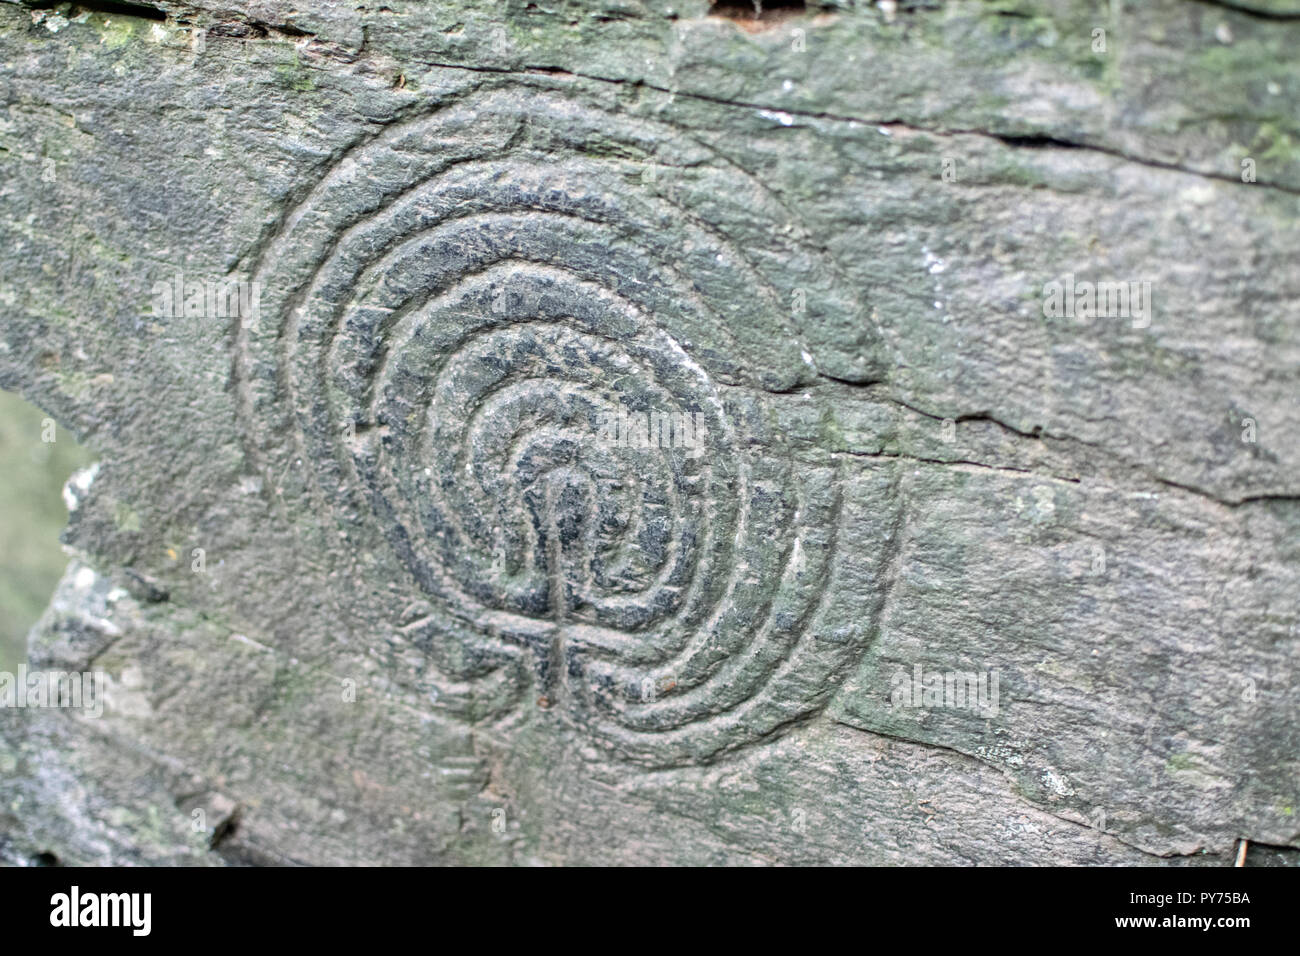 Bronze Age Labyrinth Rock Carvings at Rocky Valley, Between Boscastle and Tintagel, Cornwall UK Stock Photo